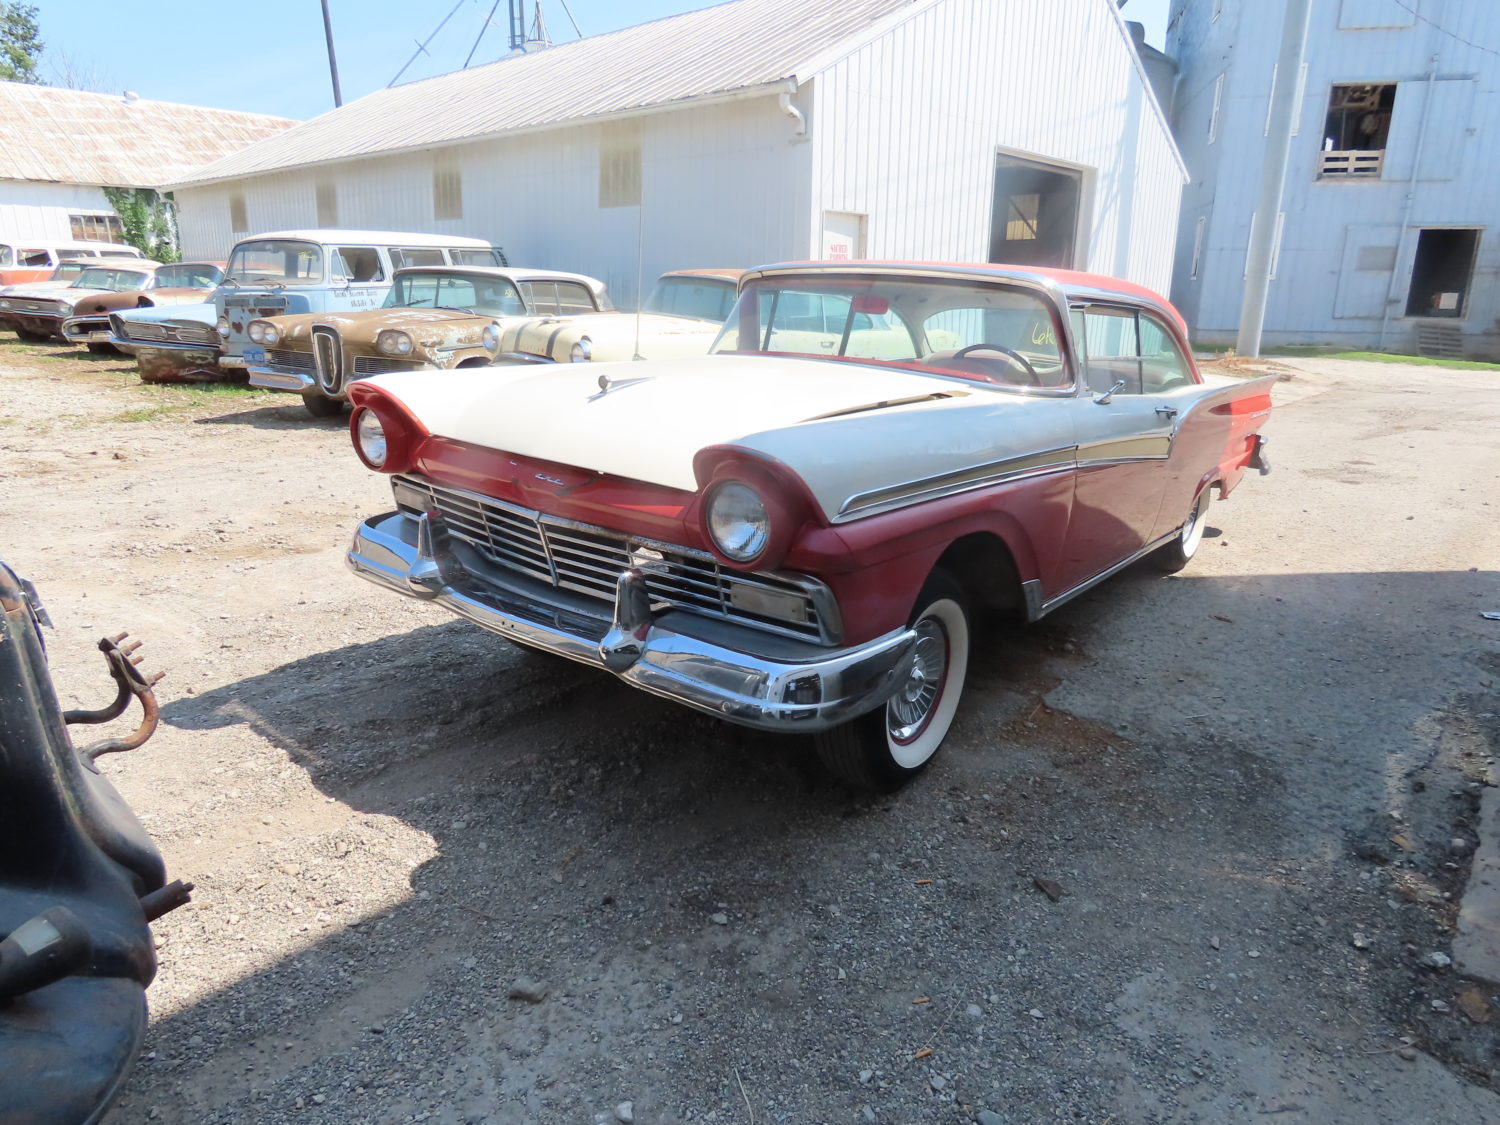 Approx. 100 American Classics Cars At Auction! The Sorensen Collection-LIVE ONSITE W/ONLINE BIDDING!  - image 11